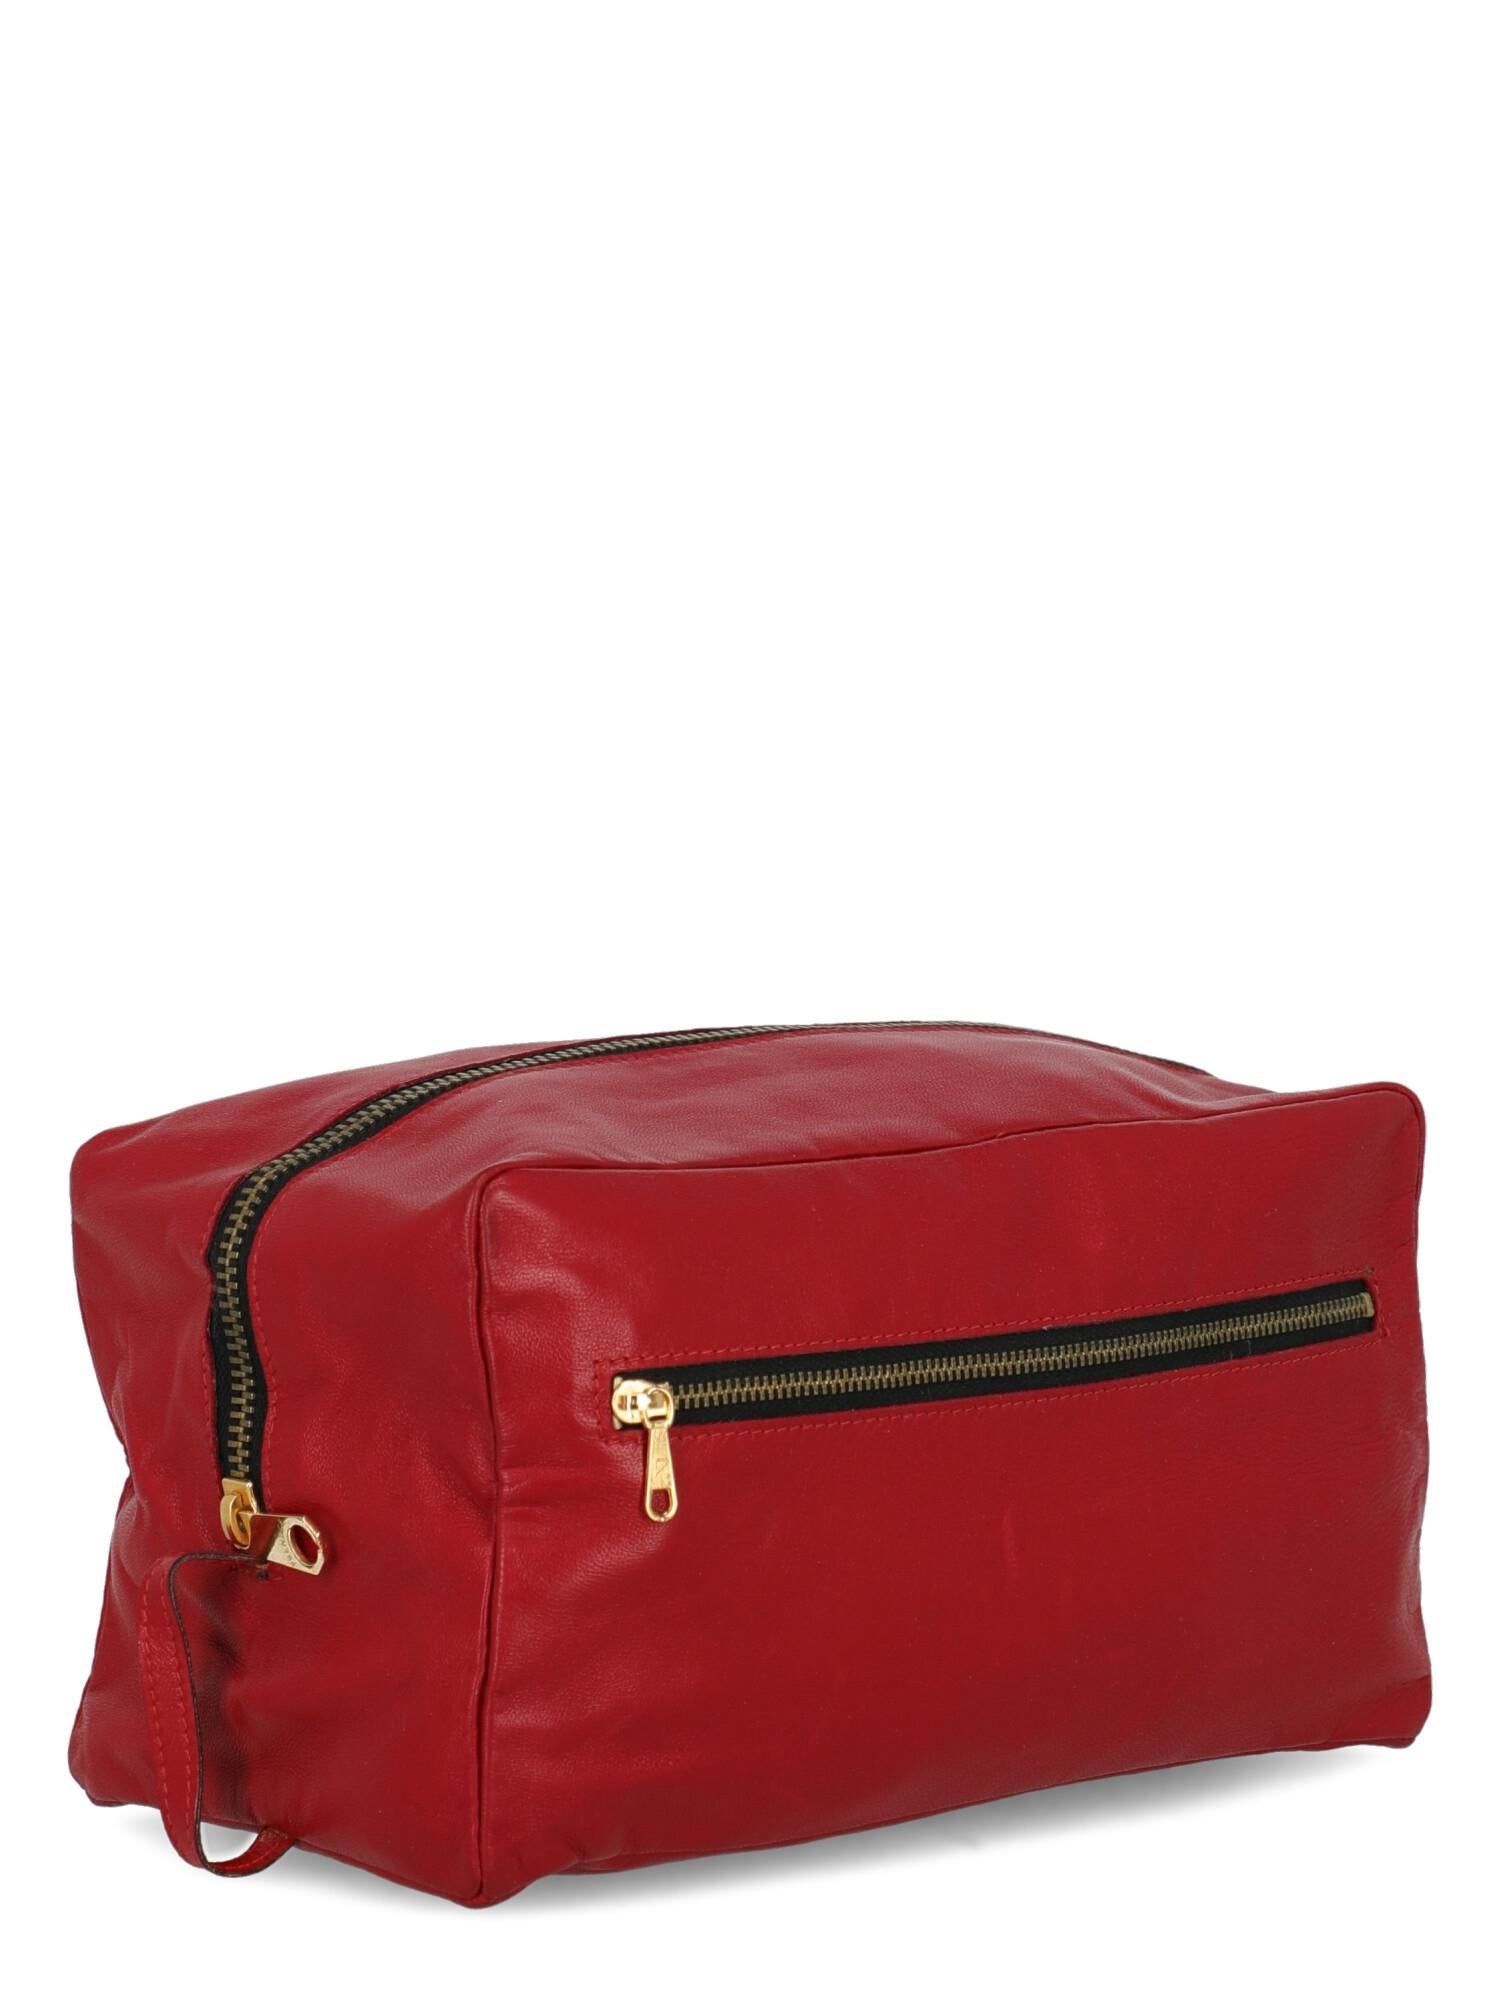 Valextra Woman Handbag Red Leather In Good Condition For Sale In Milan, IT